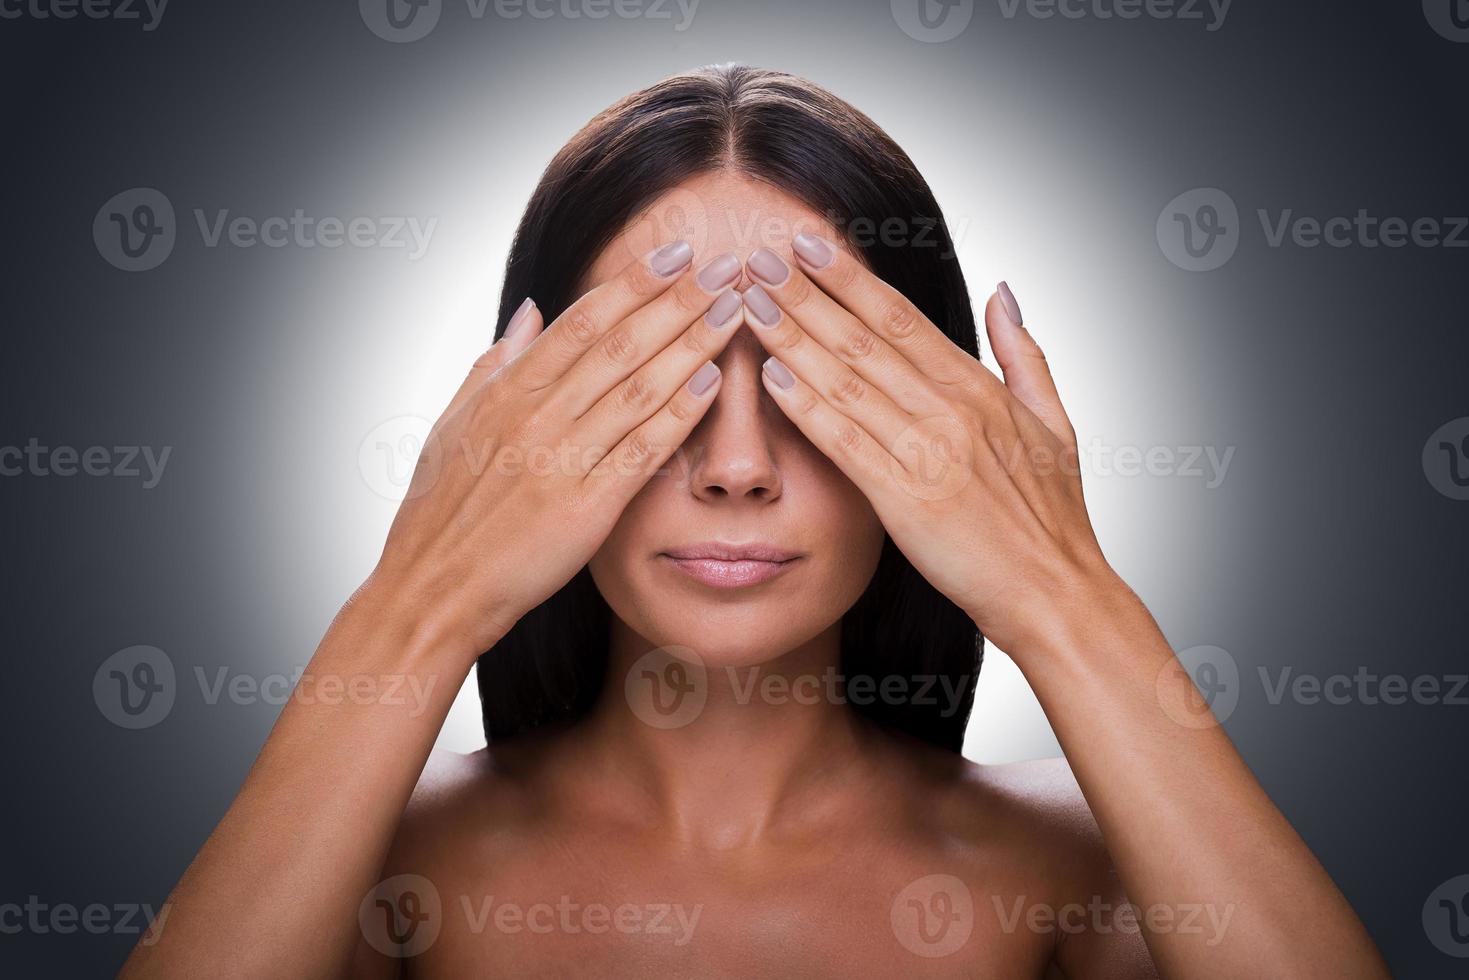 See nothing Portrait of young shirtless woman covering eyes by hands while standing against grey background photo